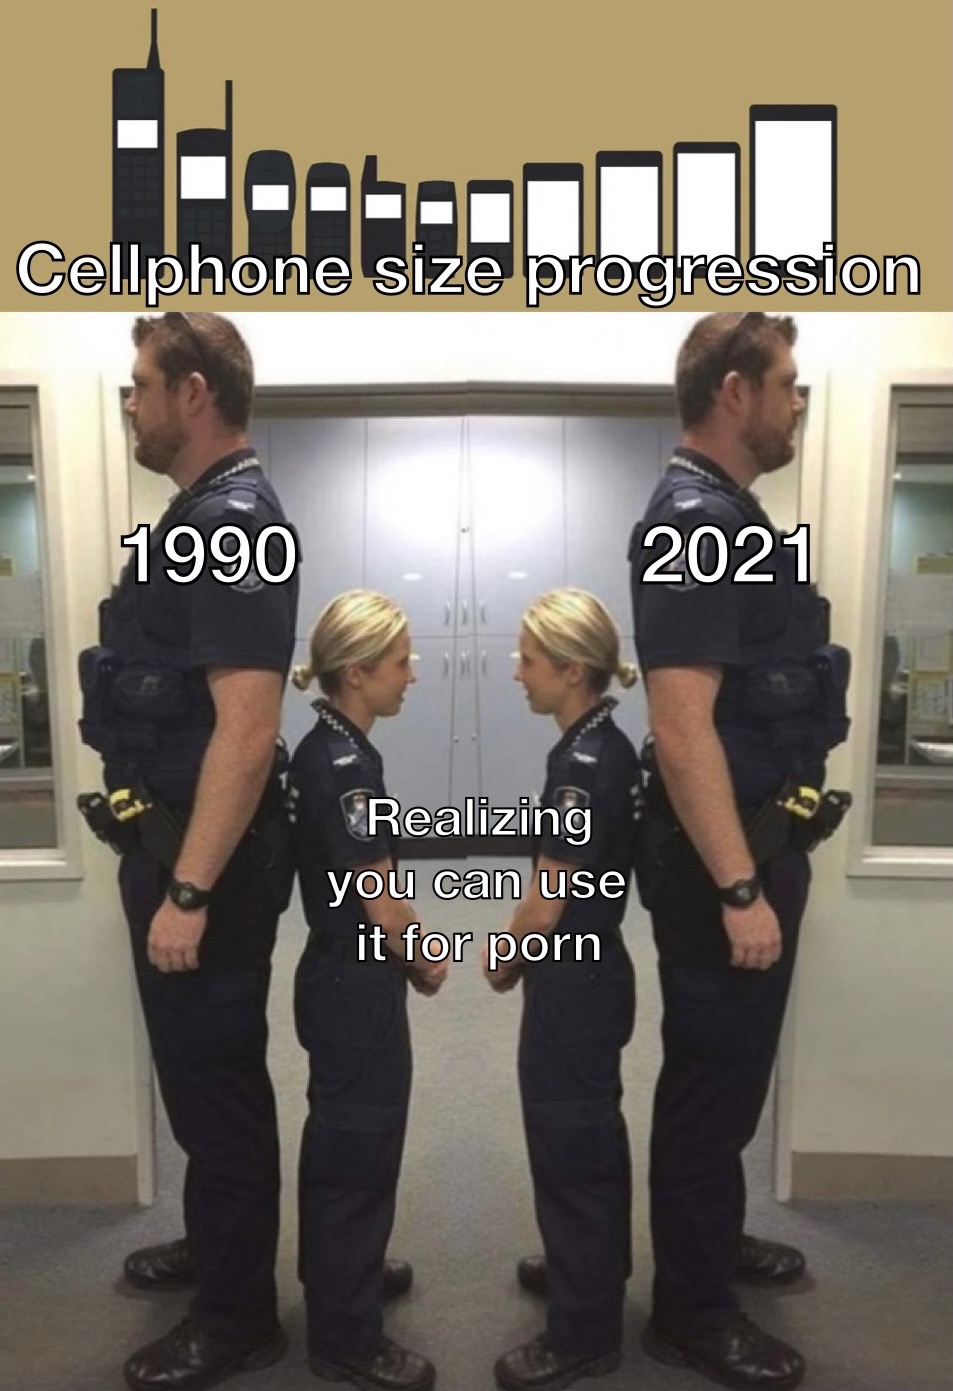 transit police - Cellphone size progression 1990 2021 Realizing you can use it for porn